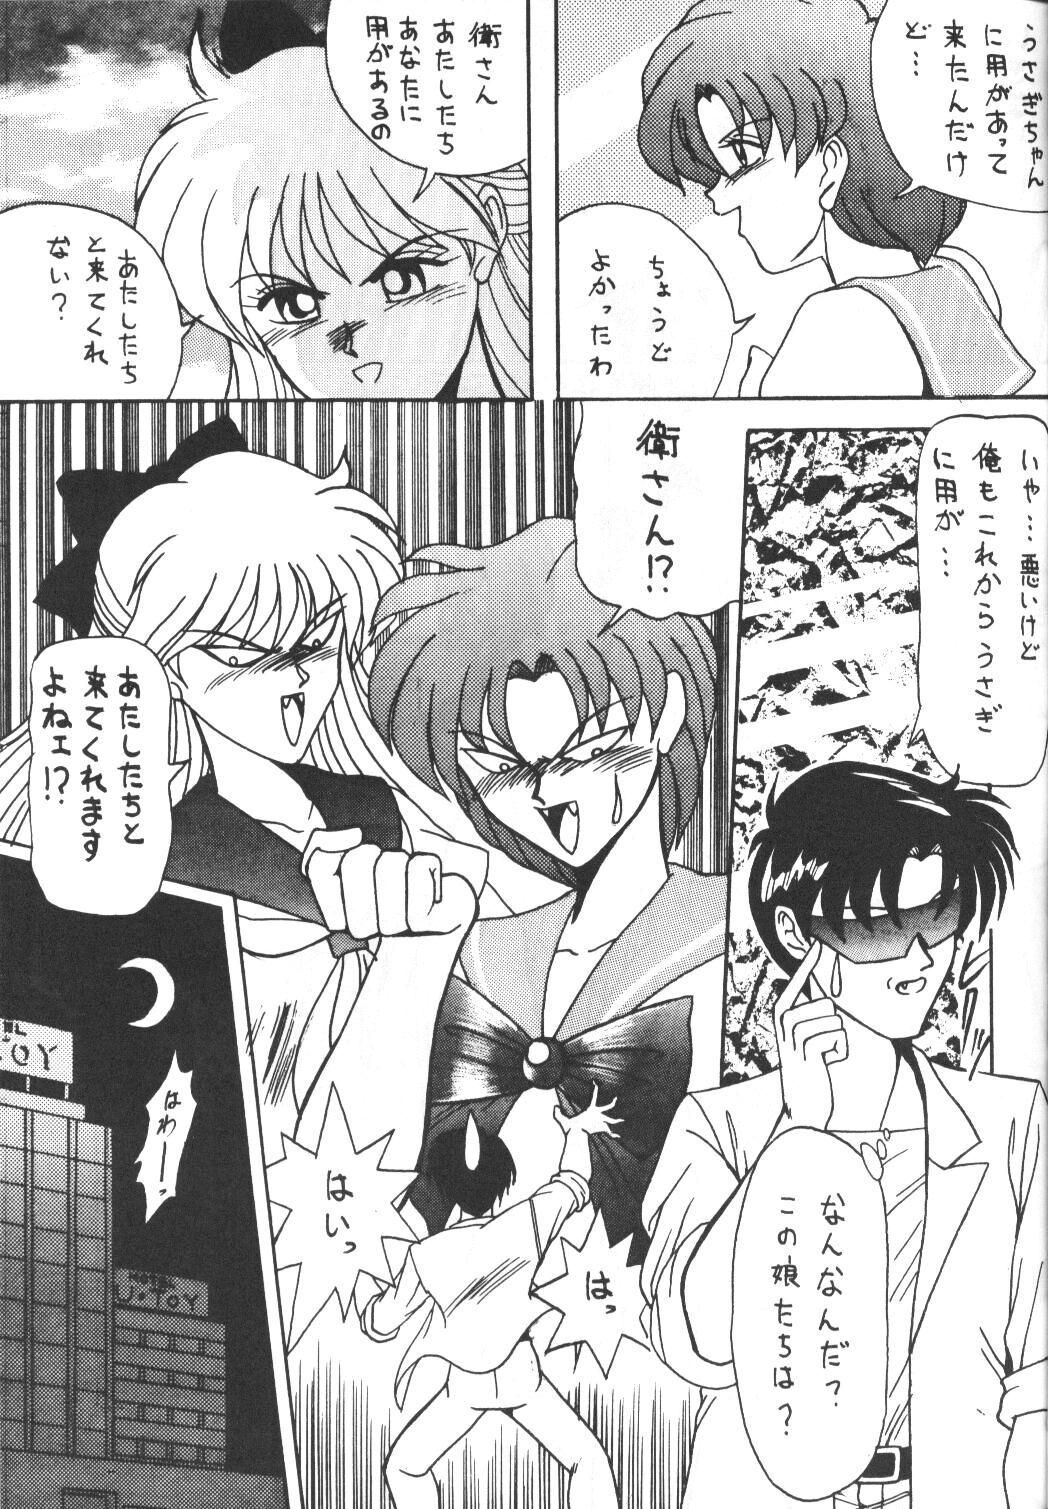 Hardcoresex Make Up 2 - Sailor moon Swing - Page 11